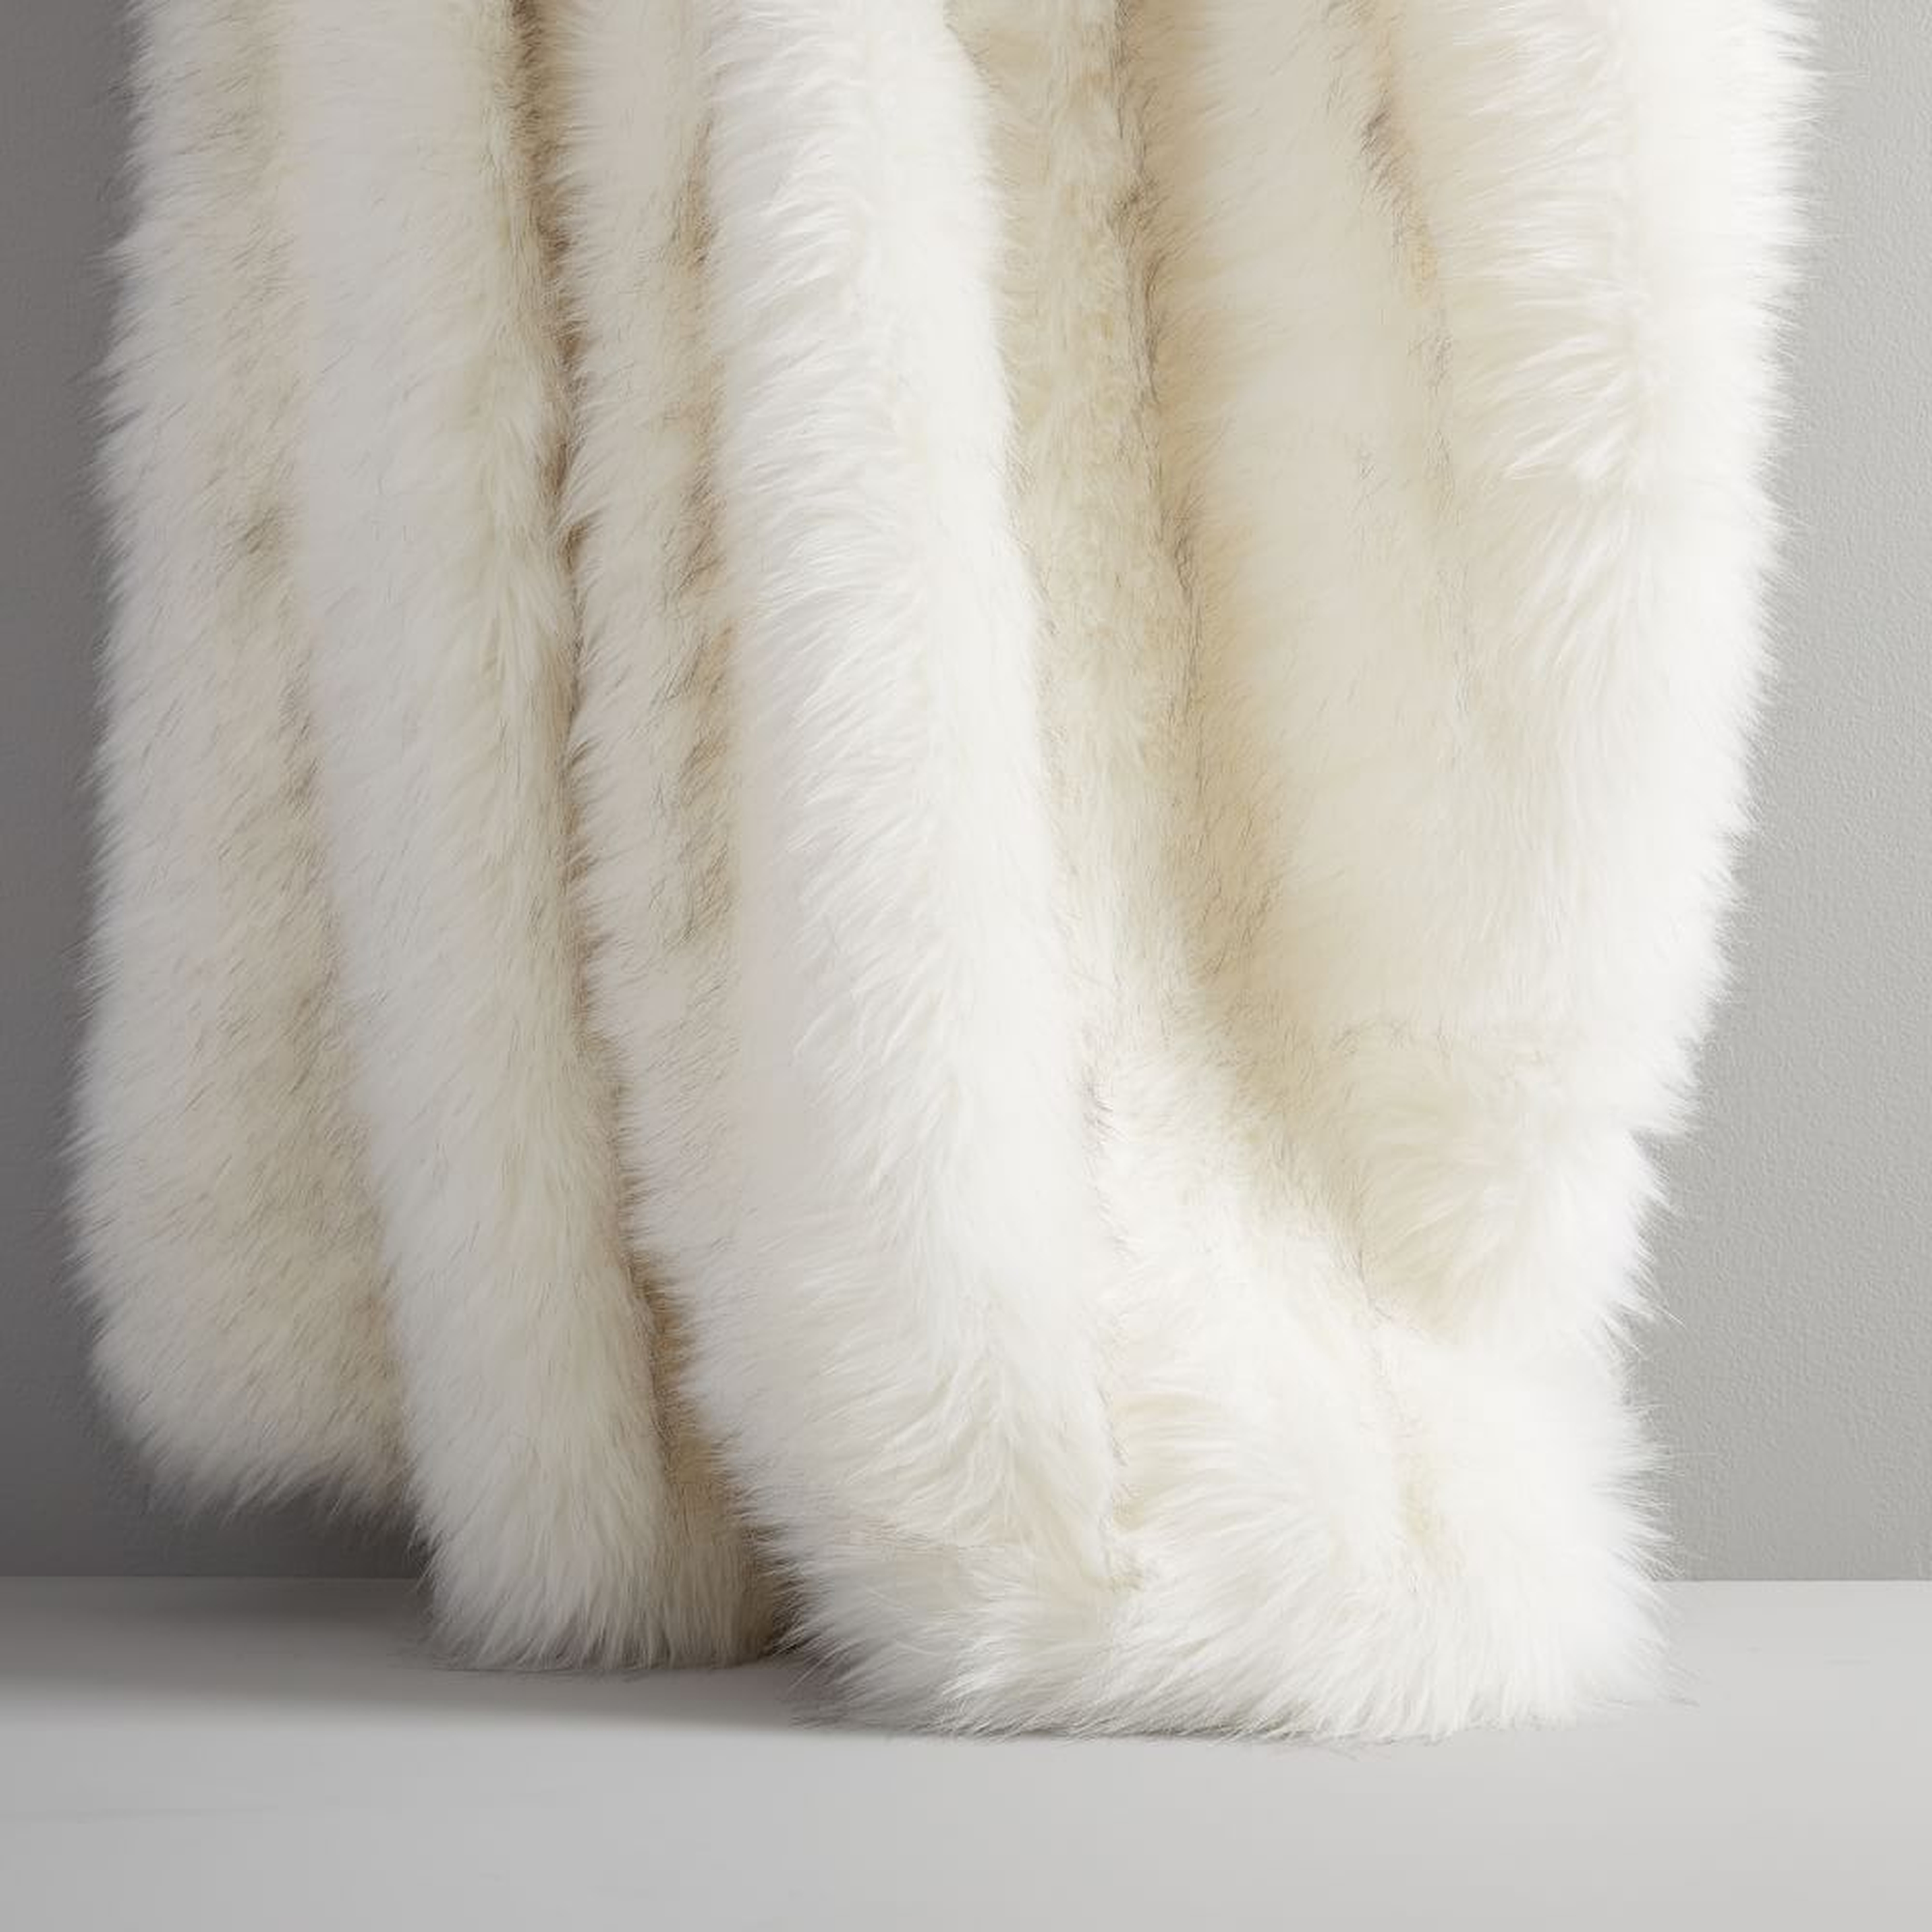 Faux Fur Brushed Tips Throw, White, 47x60 - West Elm